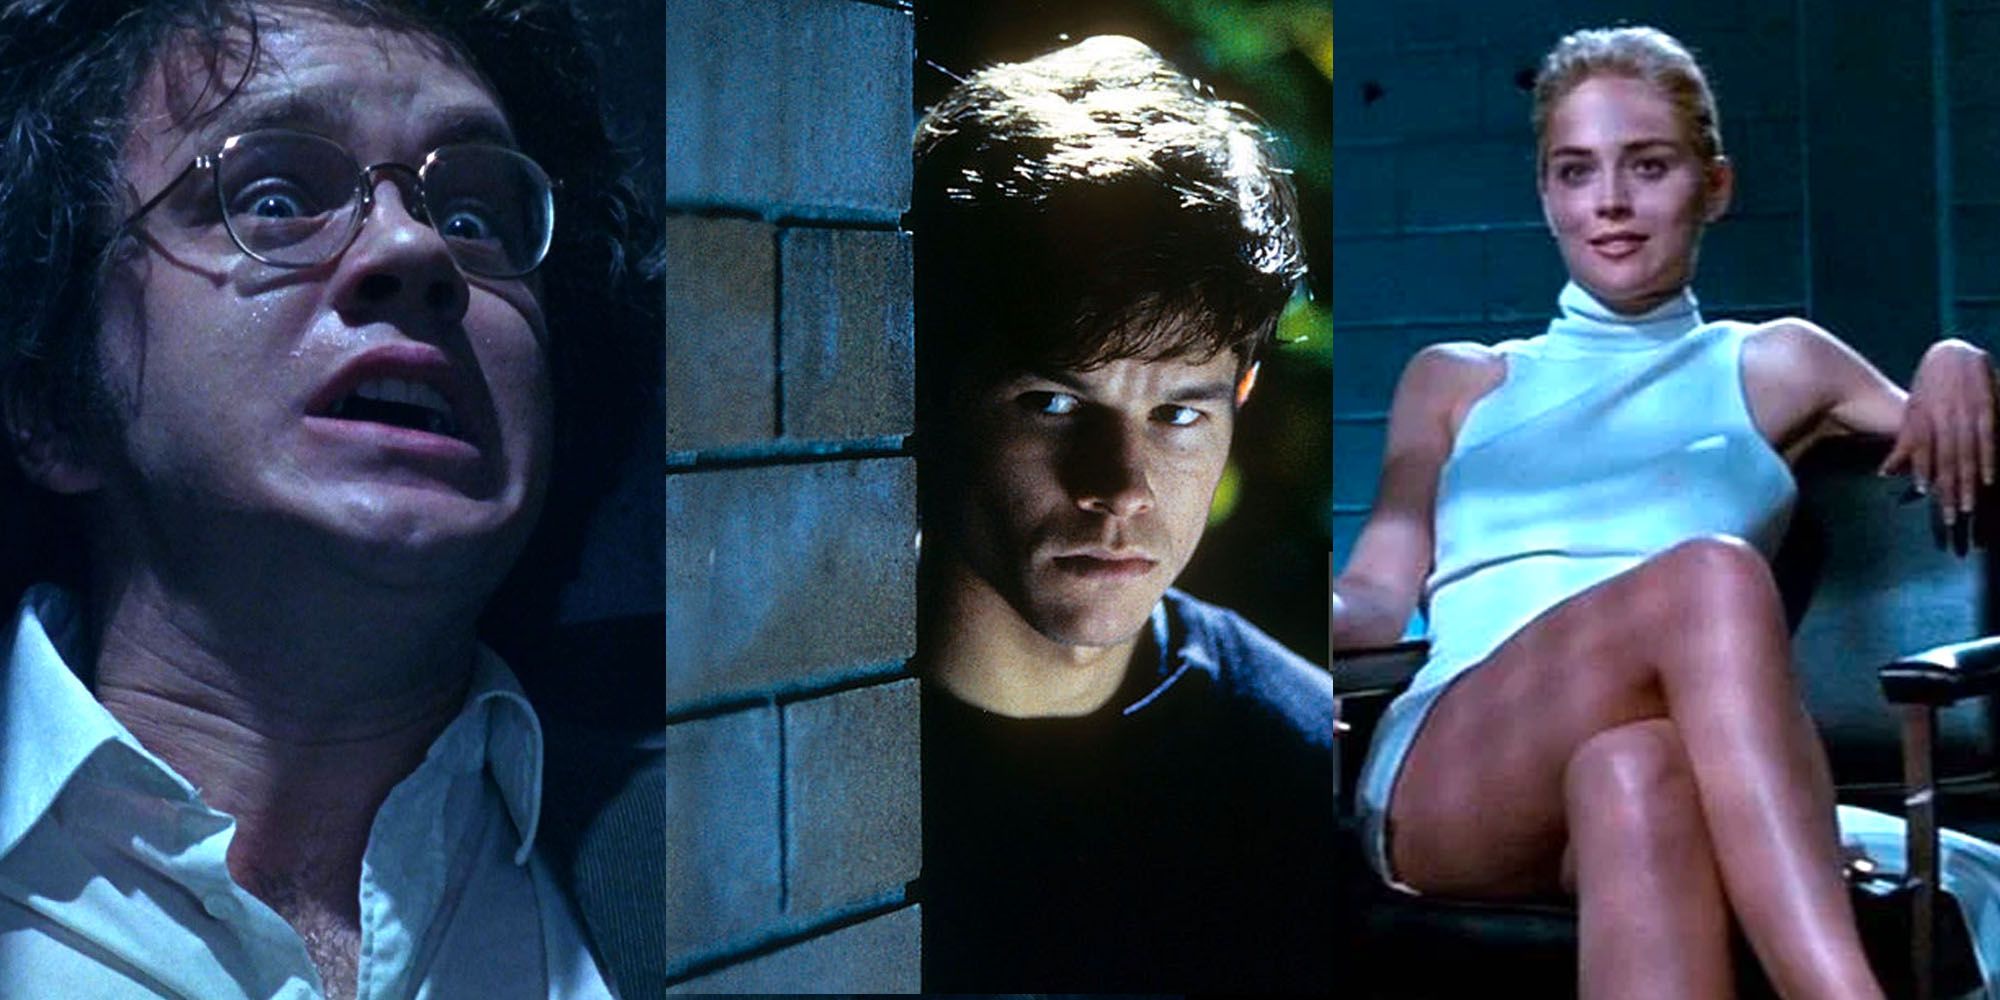 Jacob's Ladder, Fear and Basic Instinct main characters